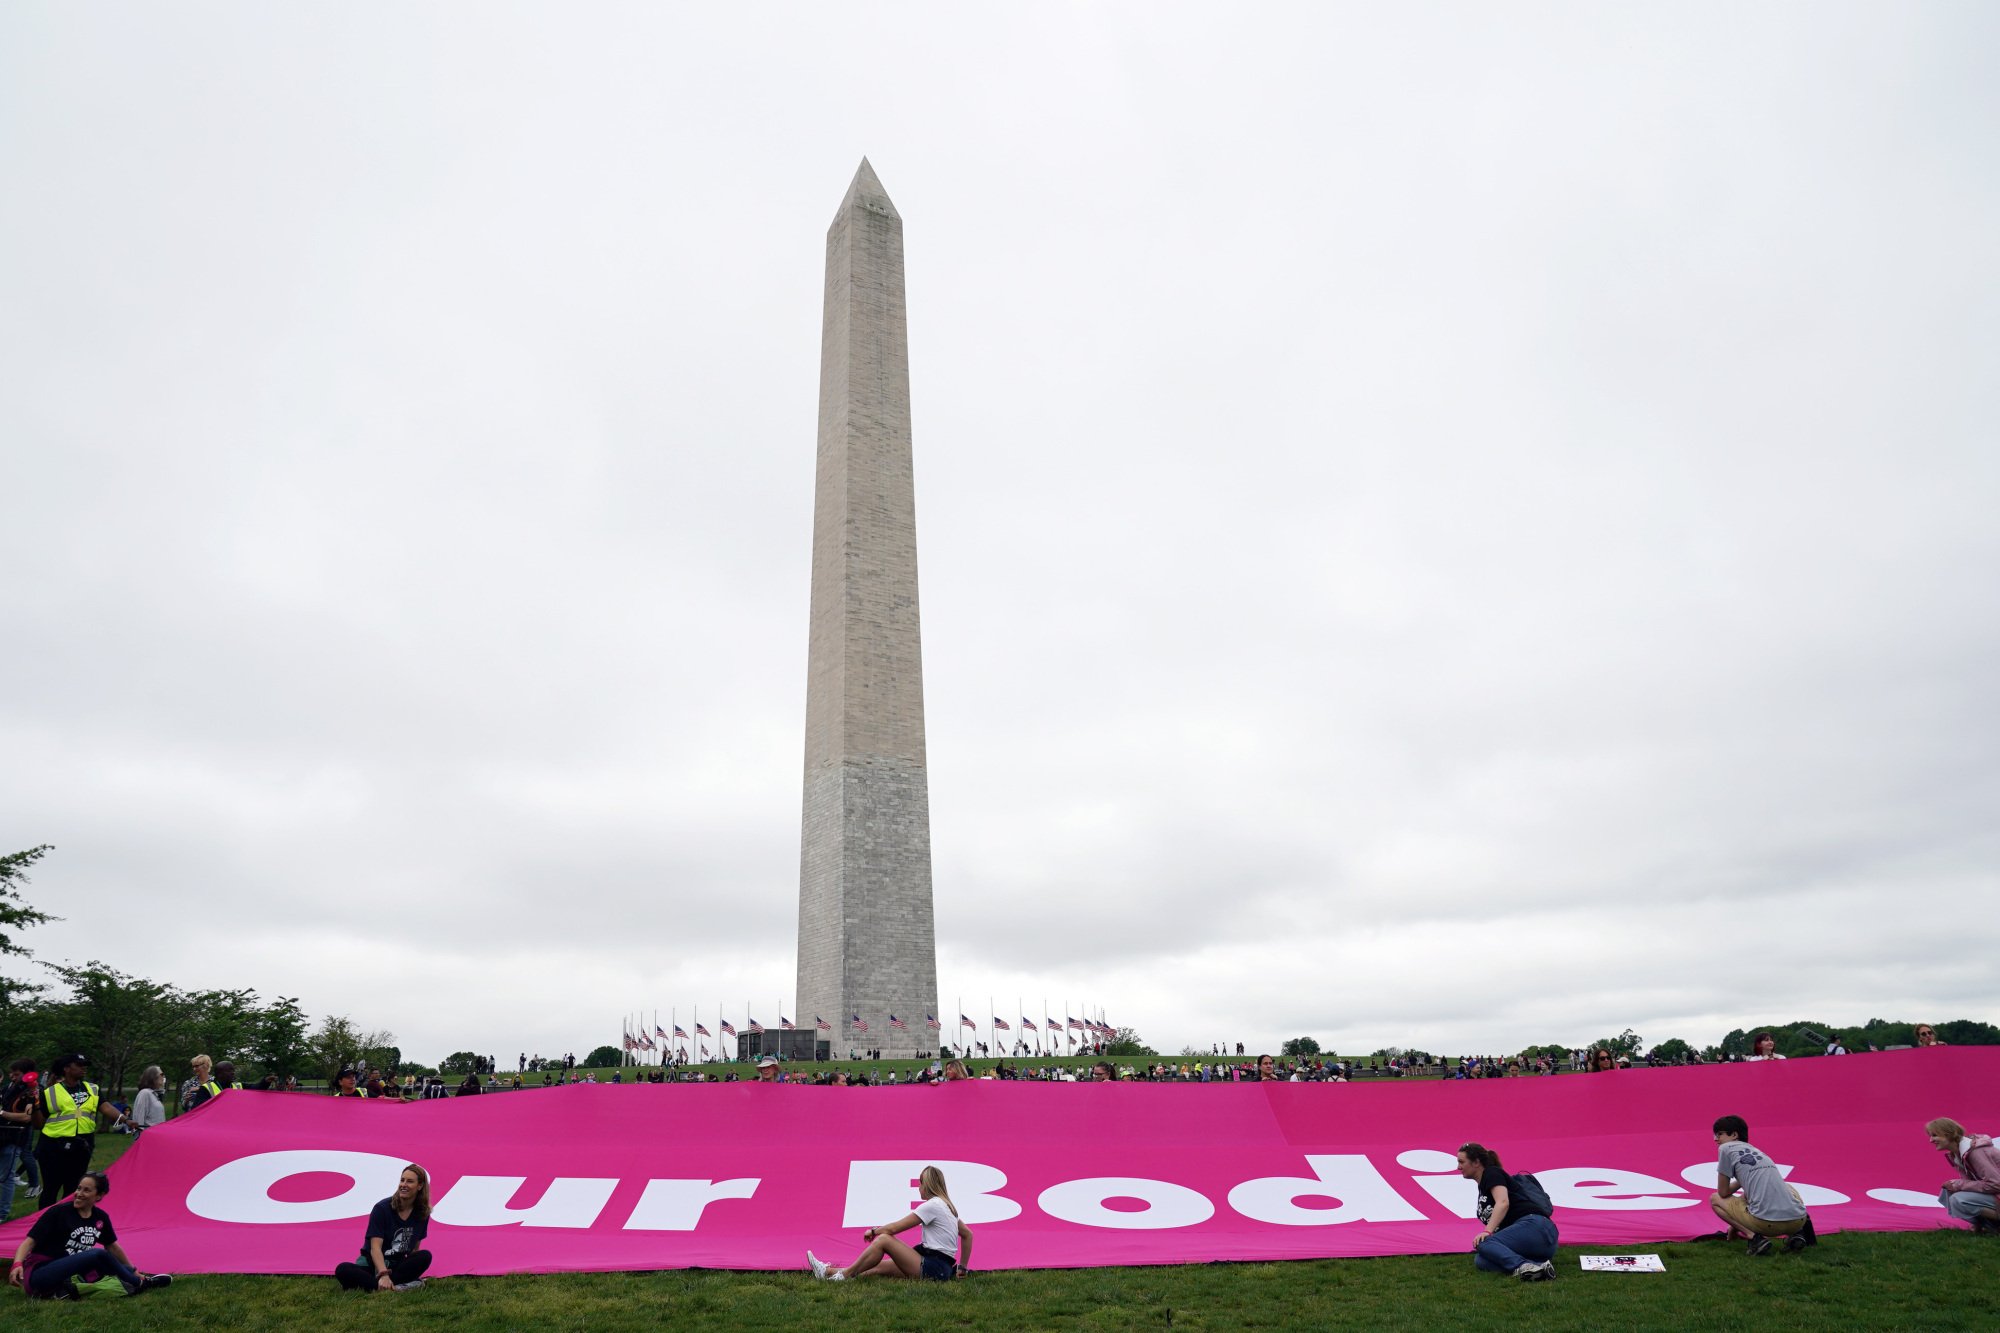 A large pink banner reading "Our Bodies" lays out in front of the Washington Monument.